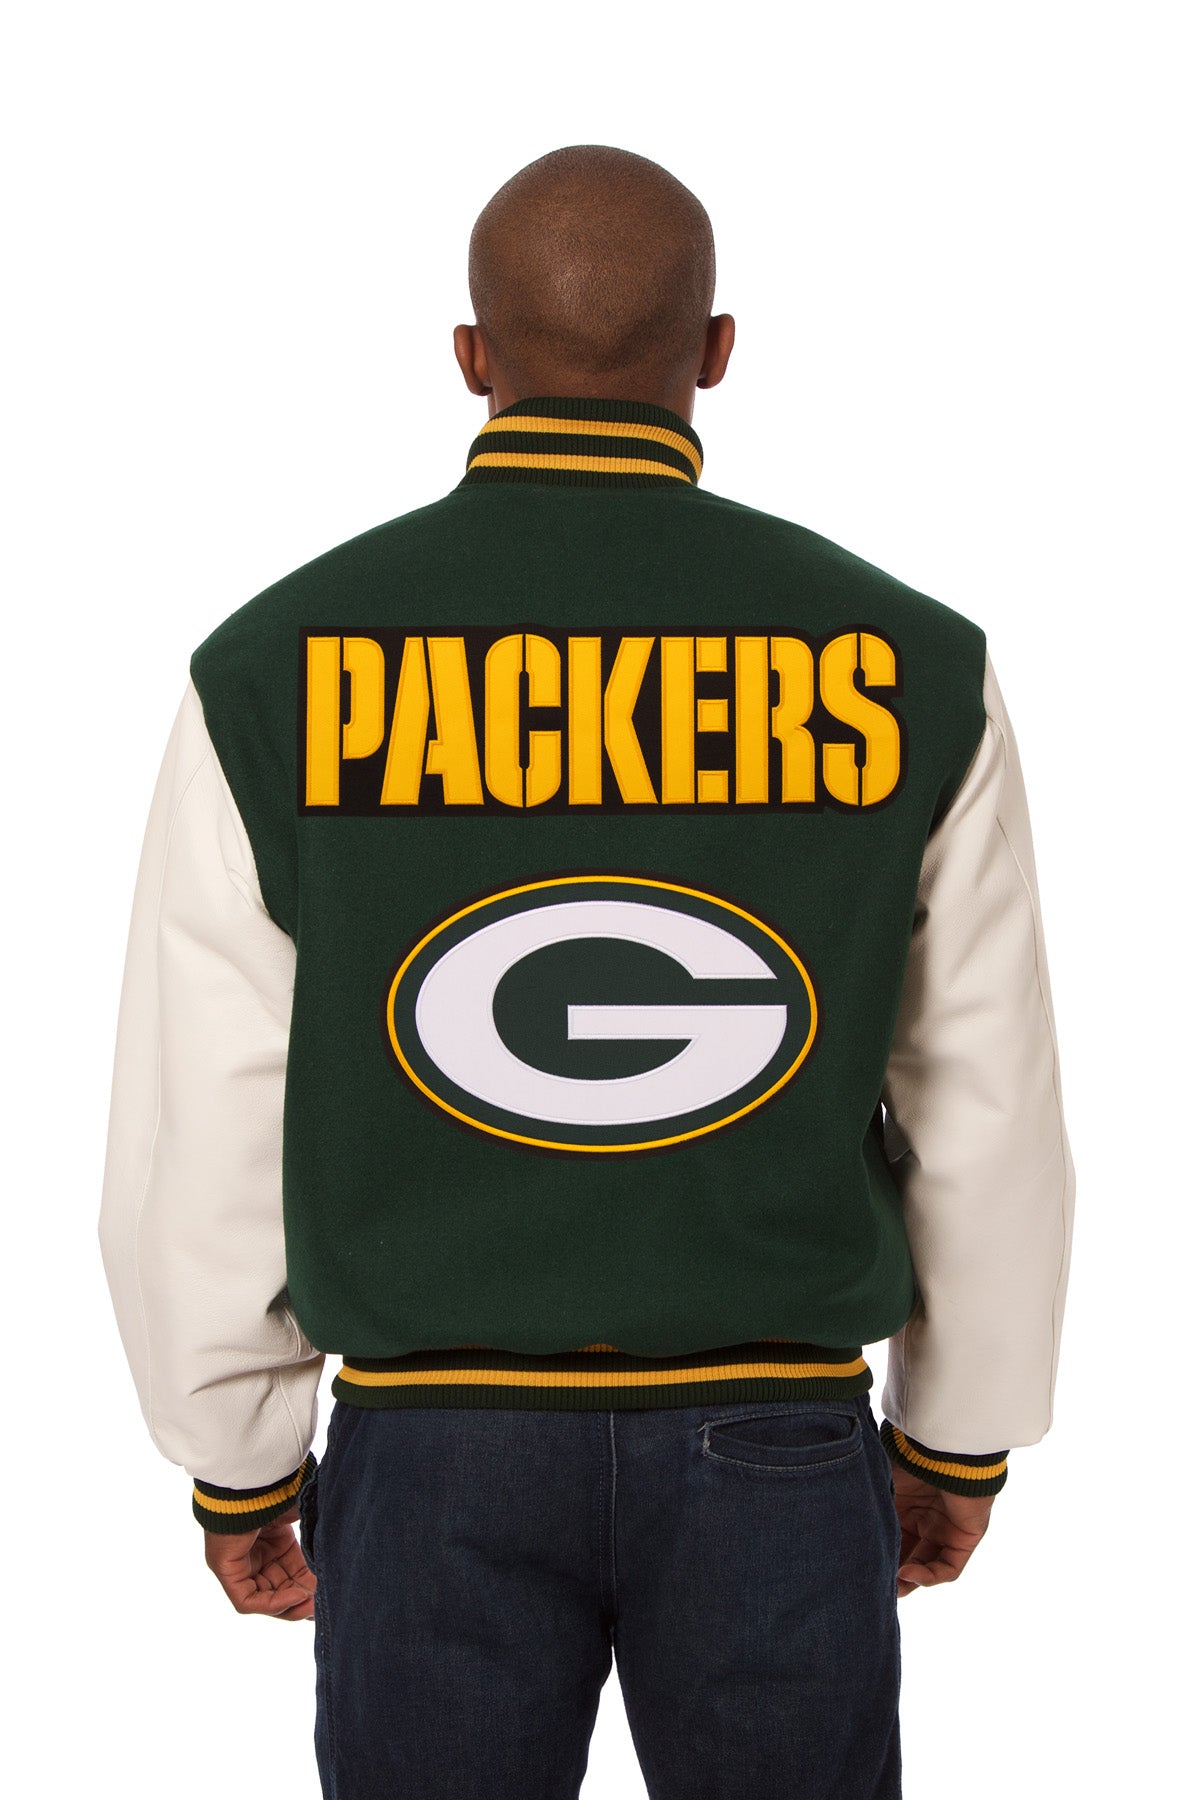 Green Bay Packers Jacket - Management And Leadership